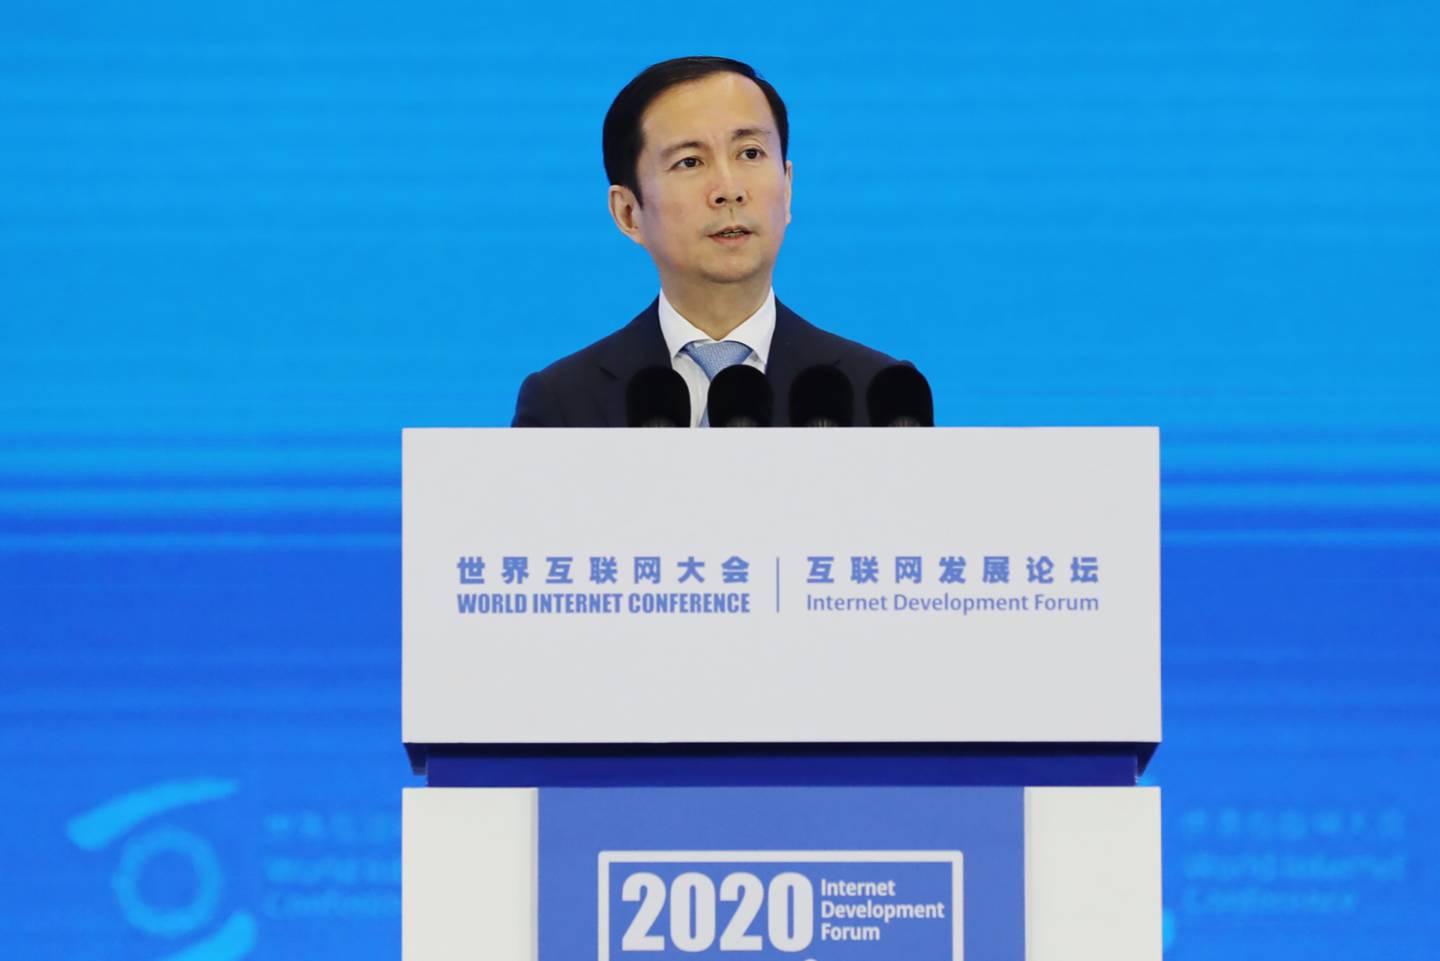 Alibaba CEO Daniel Zhang speaks at the World Internet Conference in Wuzhen on November 23, 2020